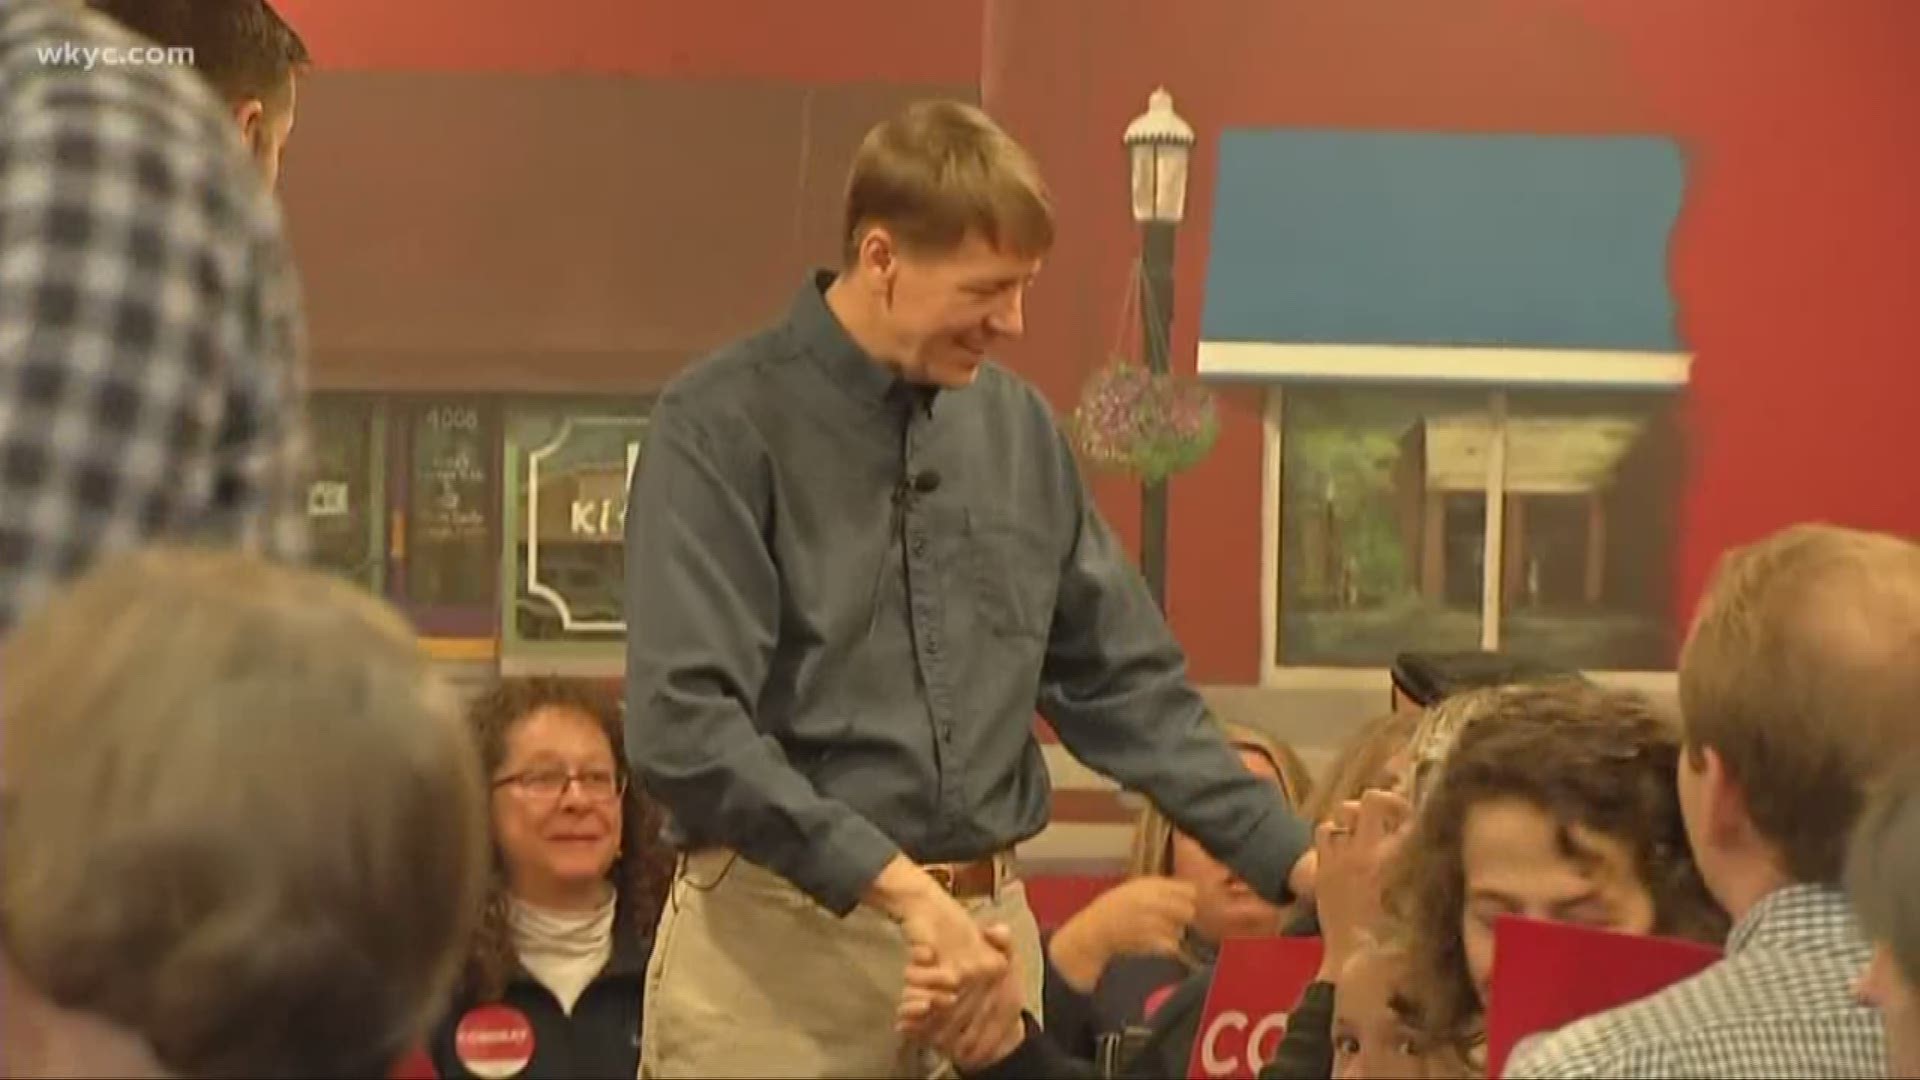 Richard Cordray is running for governor